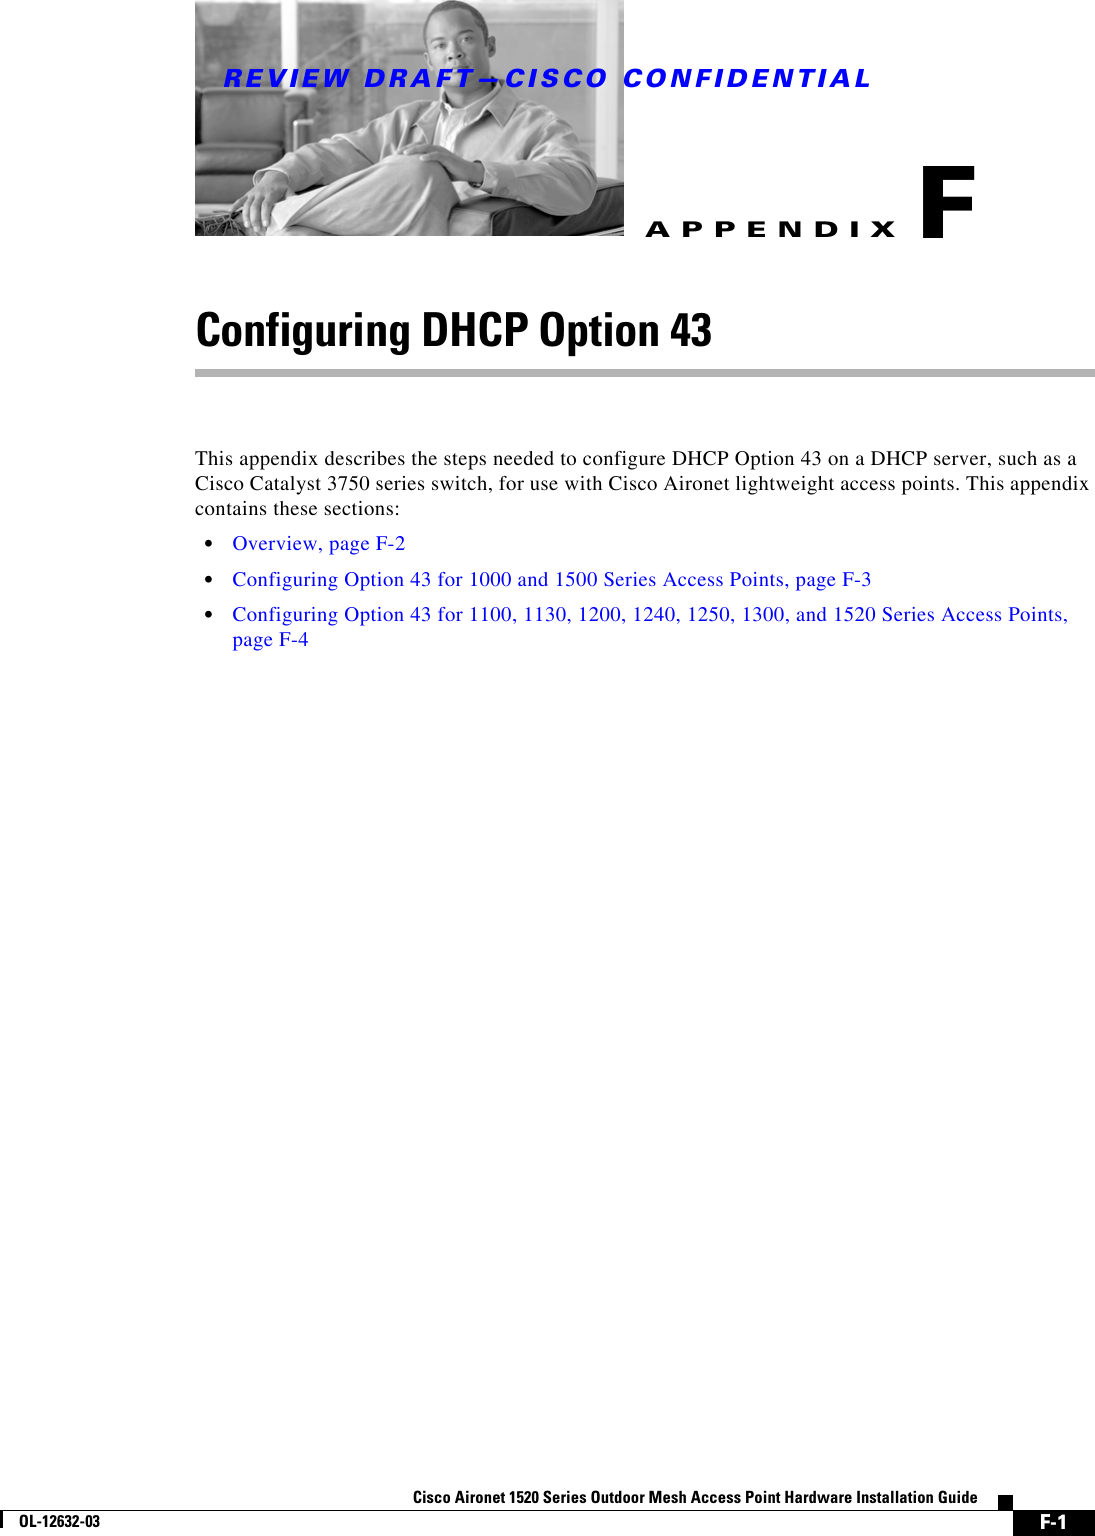 REVIEW DRAFT—CISCO CONFIDENTIALF-1Cisco Aironet 1520 Series Outdoor Mesh Access Point Hardware Installation GuideOL-12632-03APPENDIXFConfiguring DHCP Option 43This appendix describes the steps needed to configure DHCP Option 43 on a DHCP server, such as a Cisco Catalyst 3750 series switch, for use with Cisco Aironet lightweight access points. This appendix contains these sections:  • Overview, page F-2  • Configuring Option 43 for 1000 and 1500 Series Access Points, page F-3  • Configuring Option 43 for 1100, 1130, 1200, 1240, 1250, 1300, and 1520 Series Access Points, page F-4